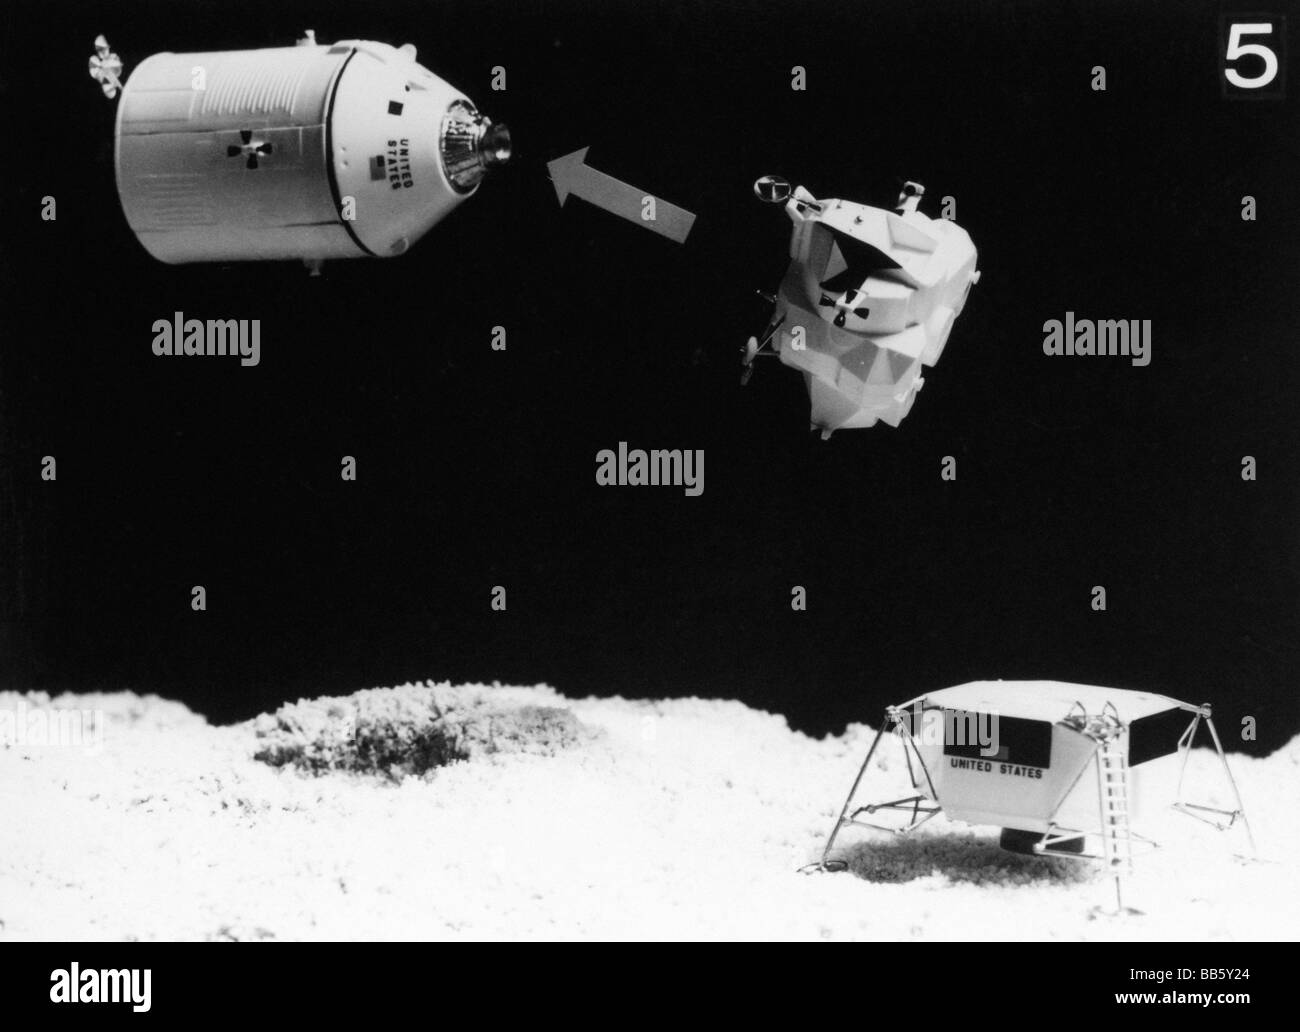 astronautics, Apollo 11, moon landing, miniature of spaceship, space modul and landing modul, deconnected, on moon surface, 1969, historic, historical, 20th century, 1960s, 60s, NASA, lunar mission, space travel, command capsule, Stock Photo